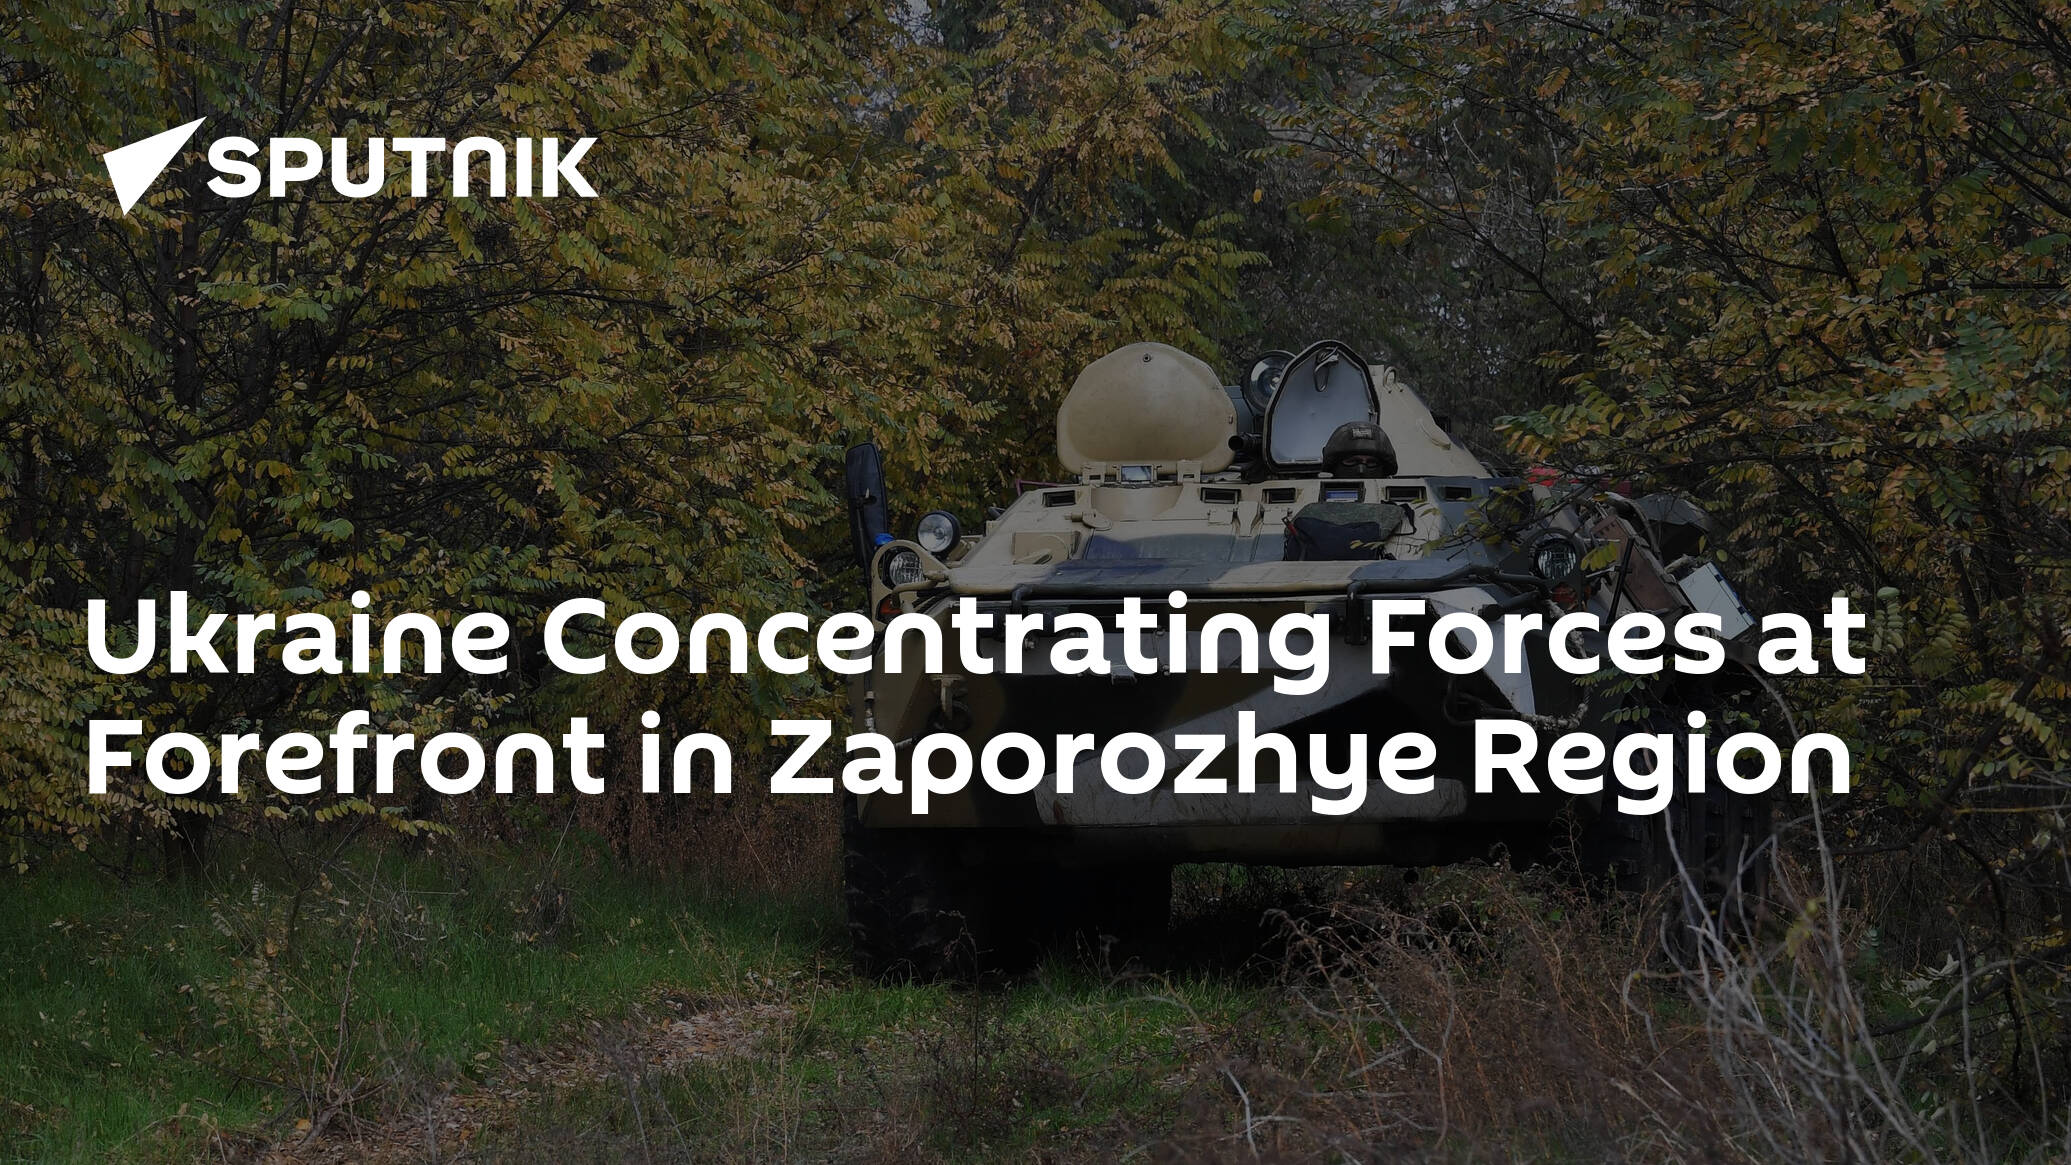 Ukraine Concentrating Forces at Forefront in Zaporozhye Region